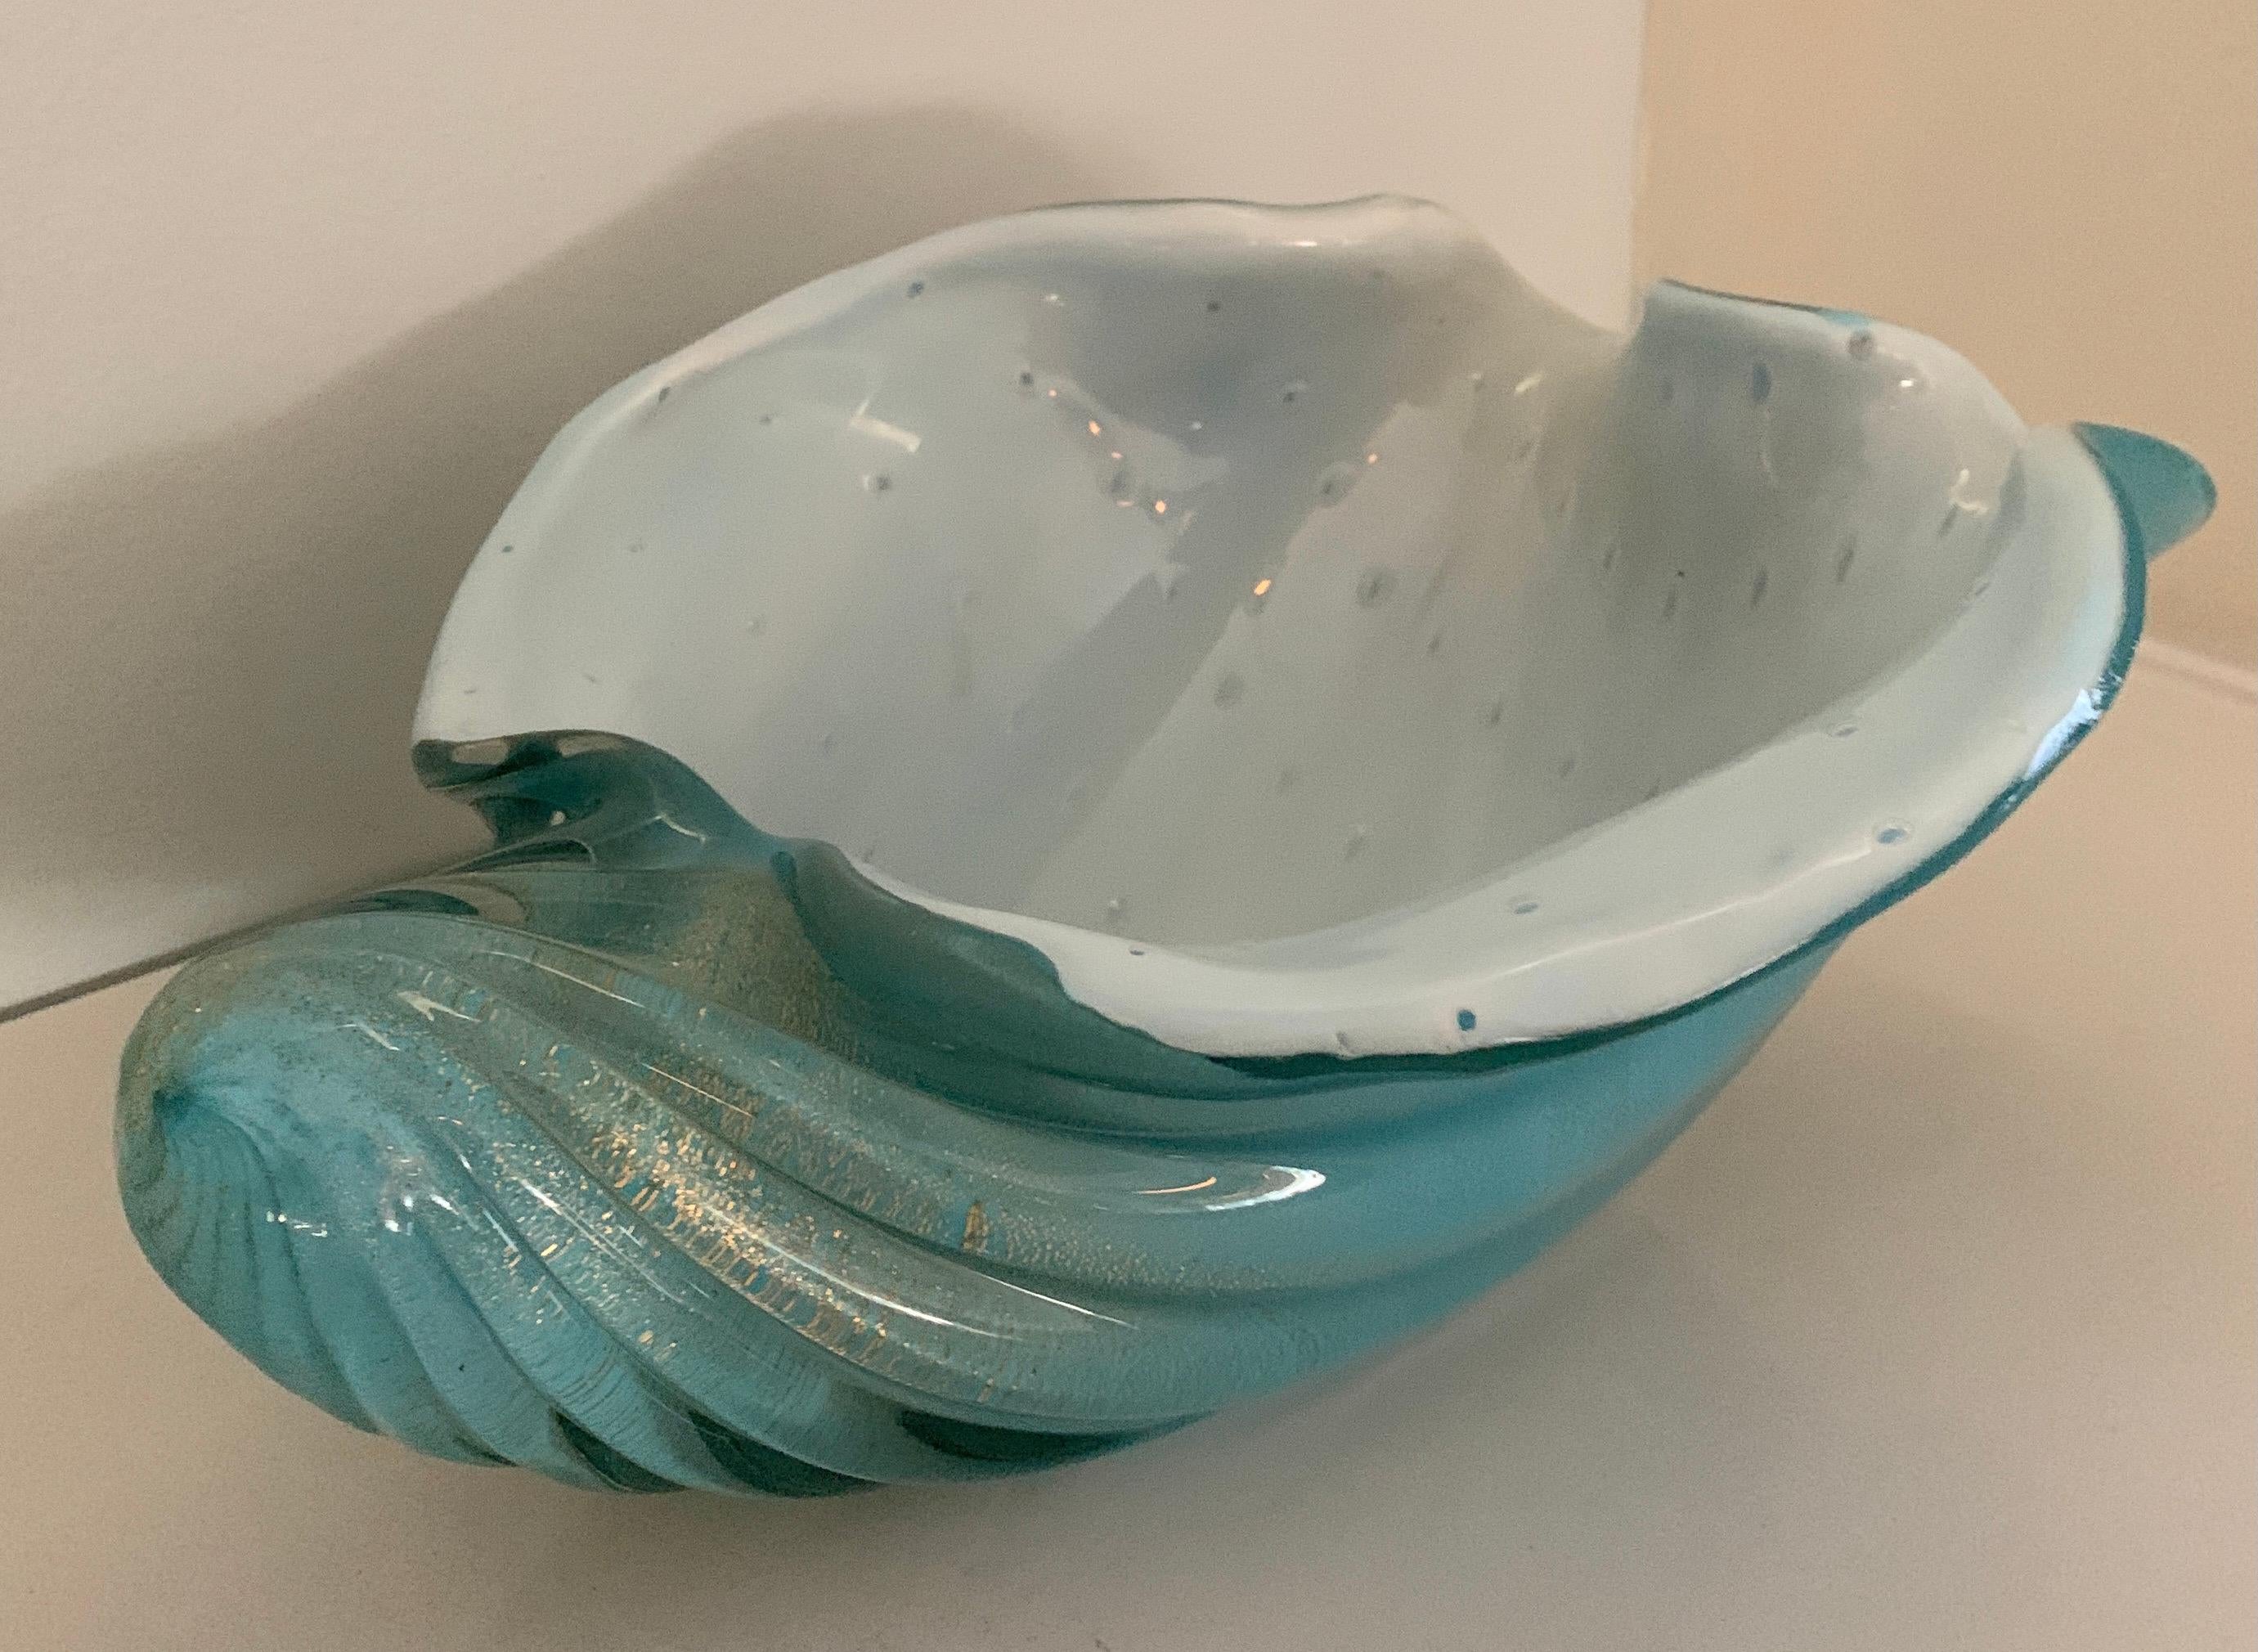 A beautiful shade of Blue glass, this Murano Glass Bowl is a wonderful decorative piece standing alone or for use as a serving piece. 

Gold flecks add to the overall stunning appearance, in very good condition with no chips or abrasions which is